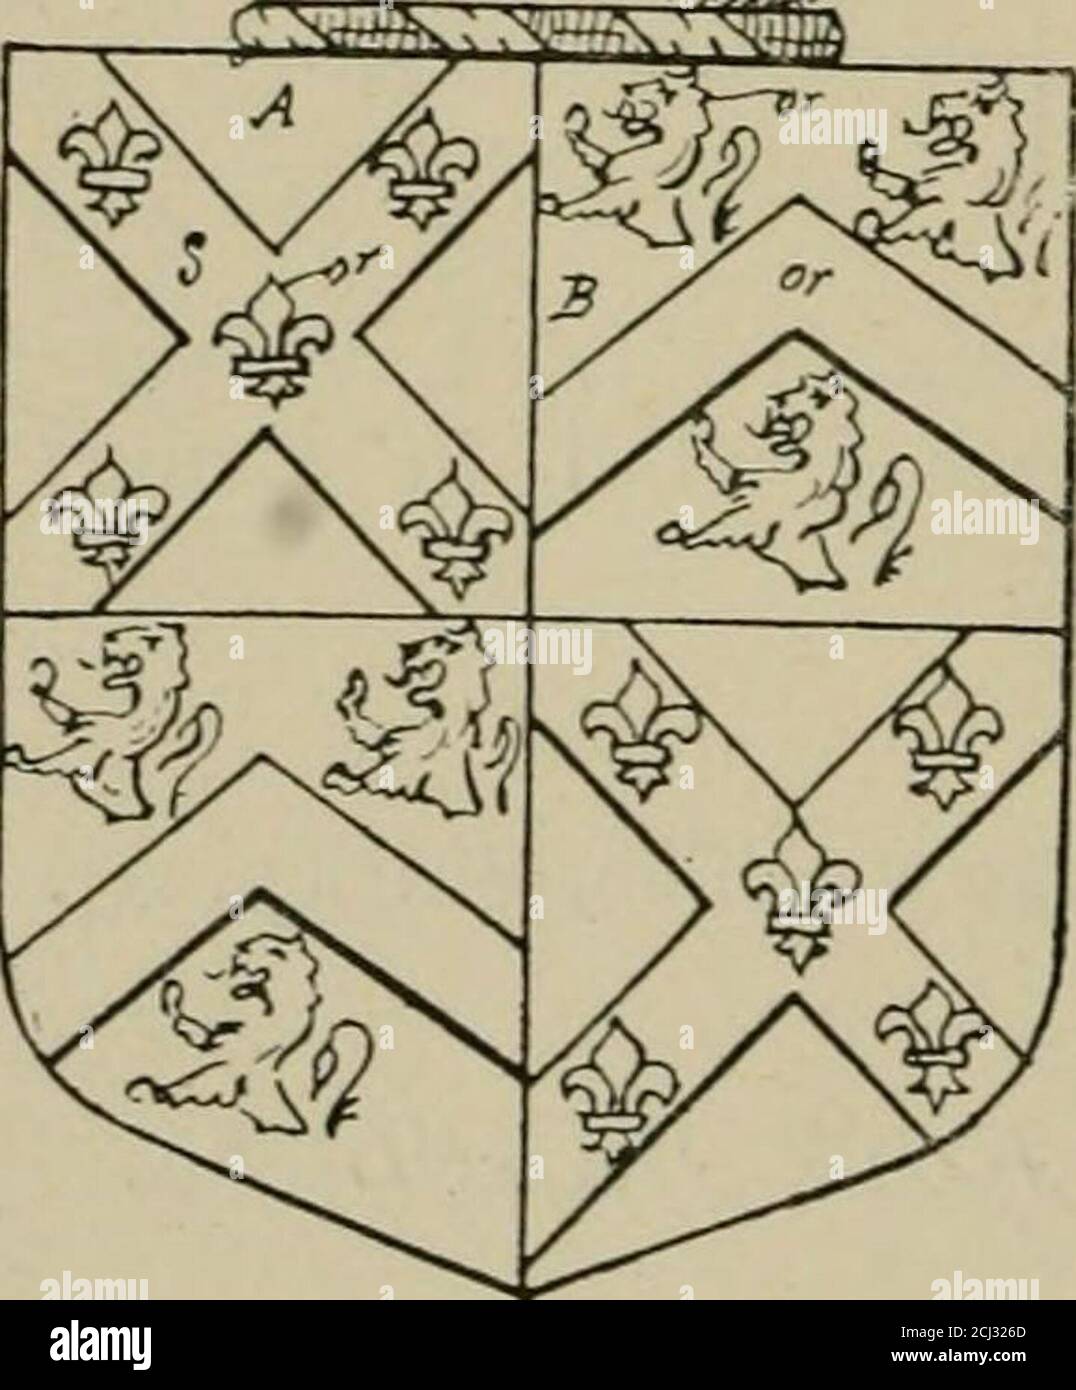 . The visitations of the county of Sussex made and taken in the years 1530, Thomas Benolte, Clarenceux king of arms; and 1633-4 by John Philipot, Somerset herald, and George Owen, York herald, for Sir John Burroughs, Garter, and Sir Richard St. George, Clarenceux . Vid. C. 16, 114. [i?. 18, 27.] S» Thomas Hawkins of Nash Court iu=FAnne da. of ye psh of Bou^hton vnder y^ Bleaue inCom. Kent, Kn*. Ciriack Petitof Colkin, Ar. Richard Hawkins of Nash=f=Mary da. of ... Long- %^3) I Court, 3 Sonne. worth, D in Divinity. John Hawkins of Nash=pMary da. of ... Wollascot Court, Ar. 1663. of .... in Com. Stock Photo